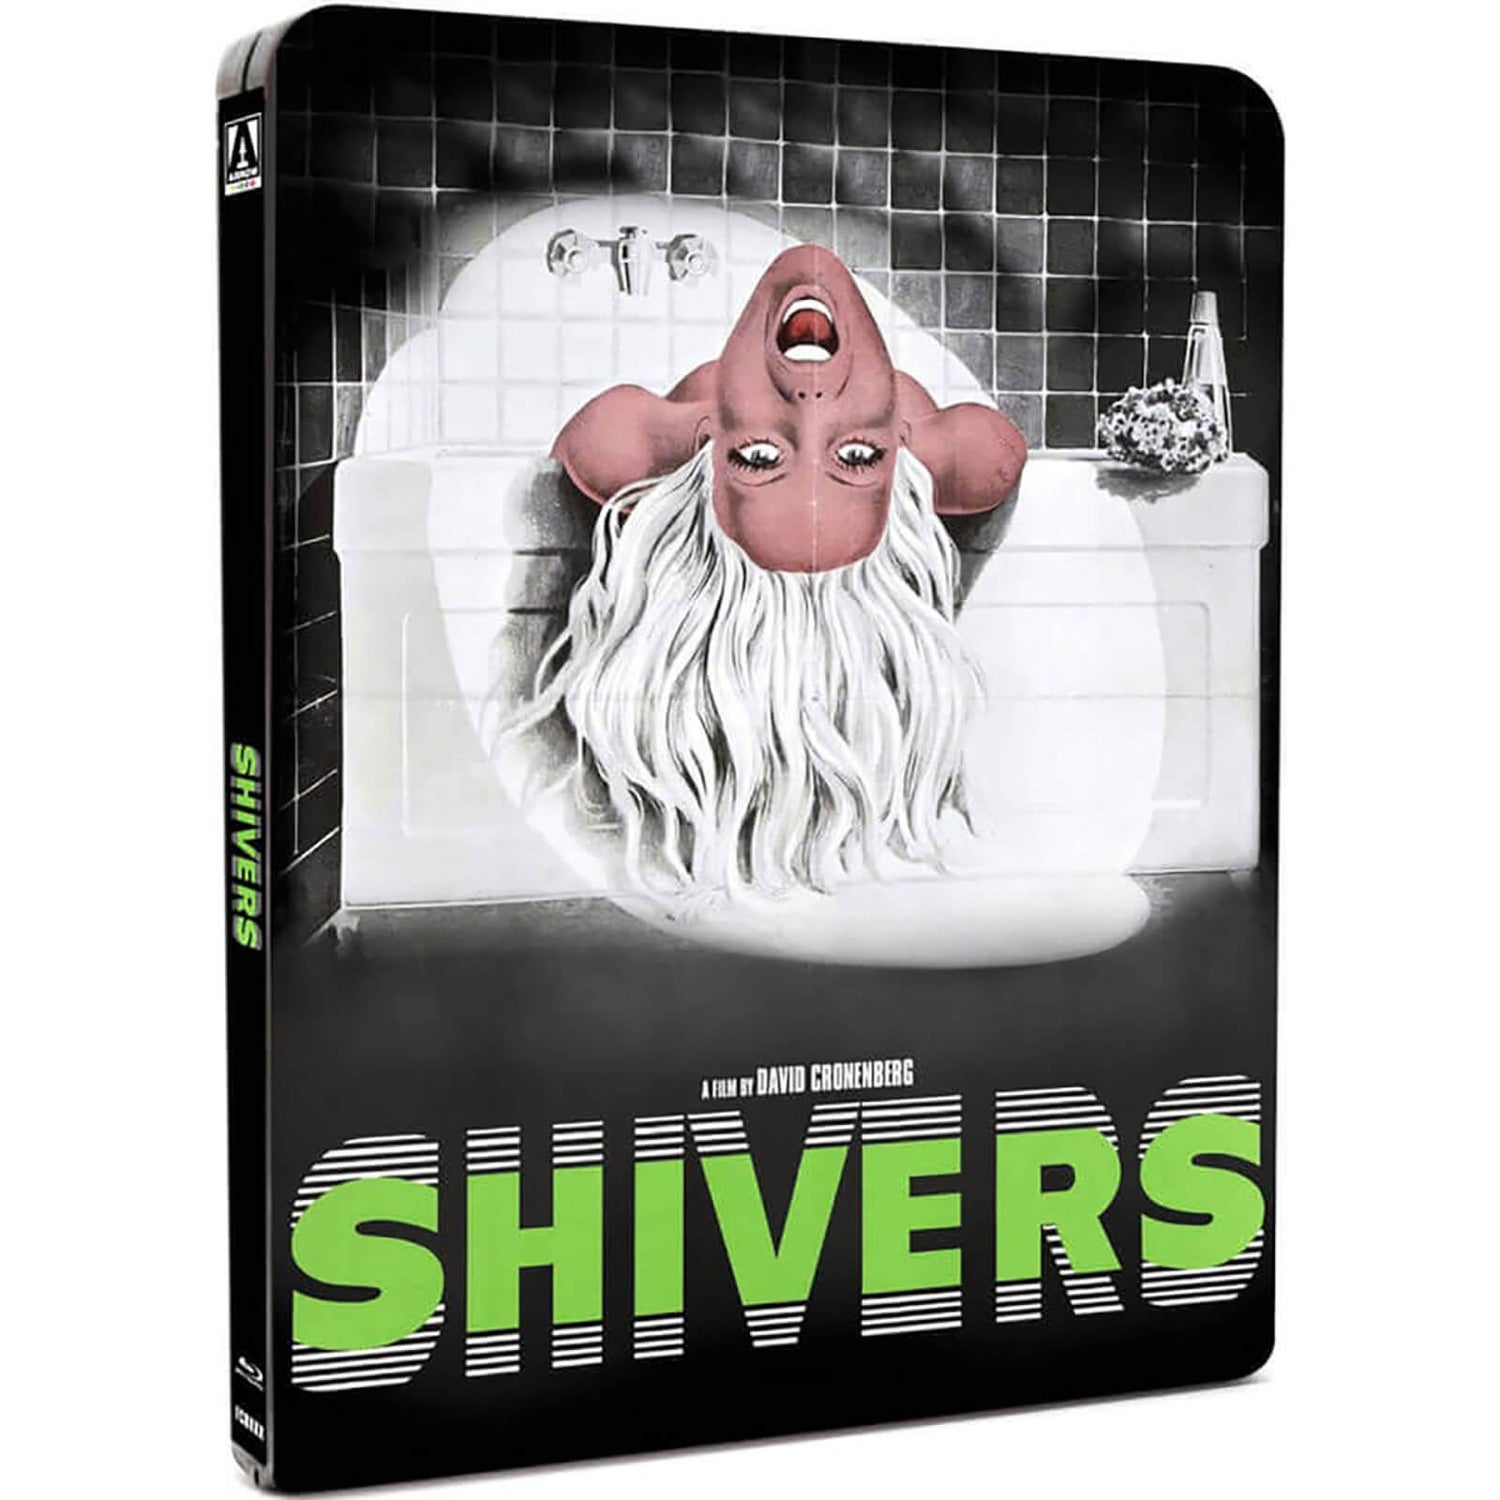 Shivers - Steelbook Edition (Includes DVD) (UK EDITION)